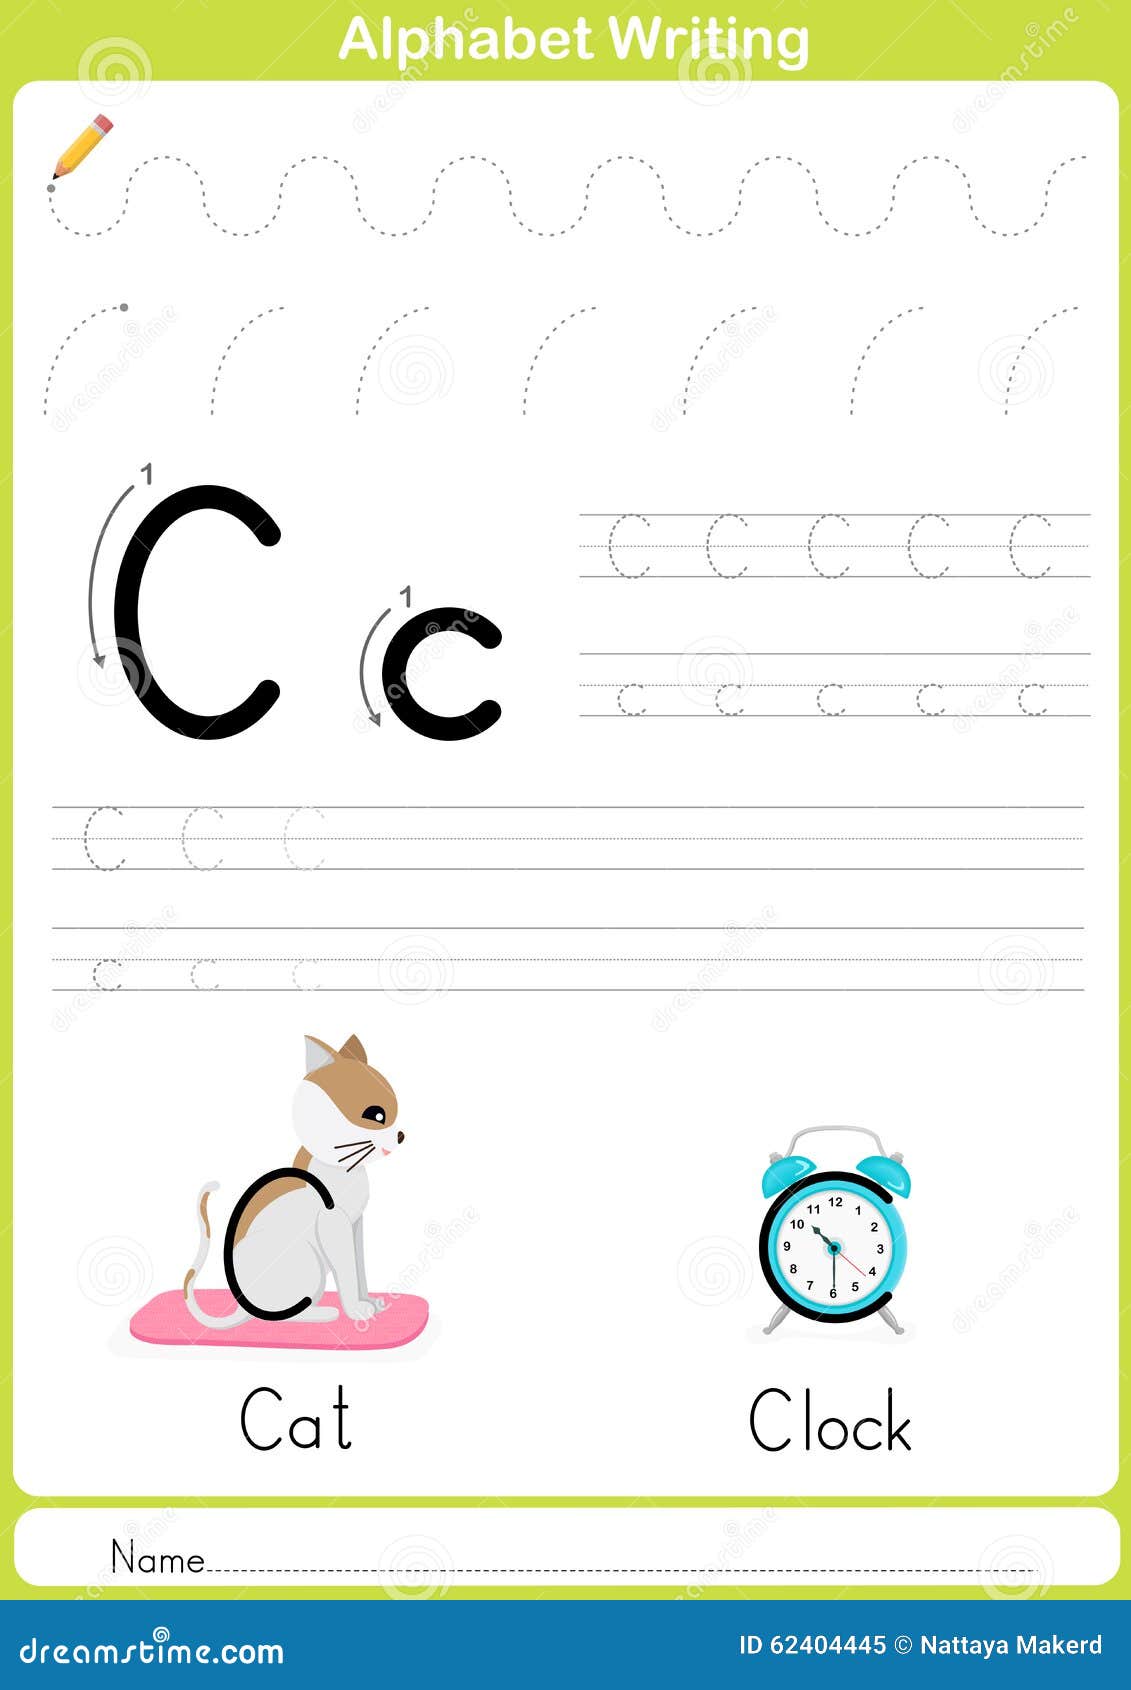 Alphabet A-Z Tracing Worksheet, Exercises For Kids - A4 Paper Ready To